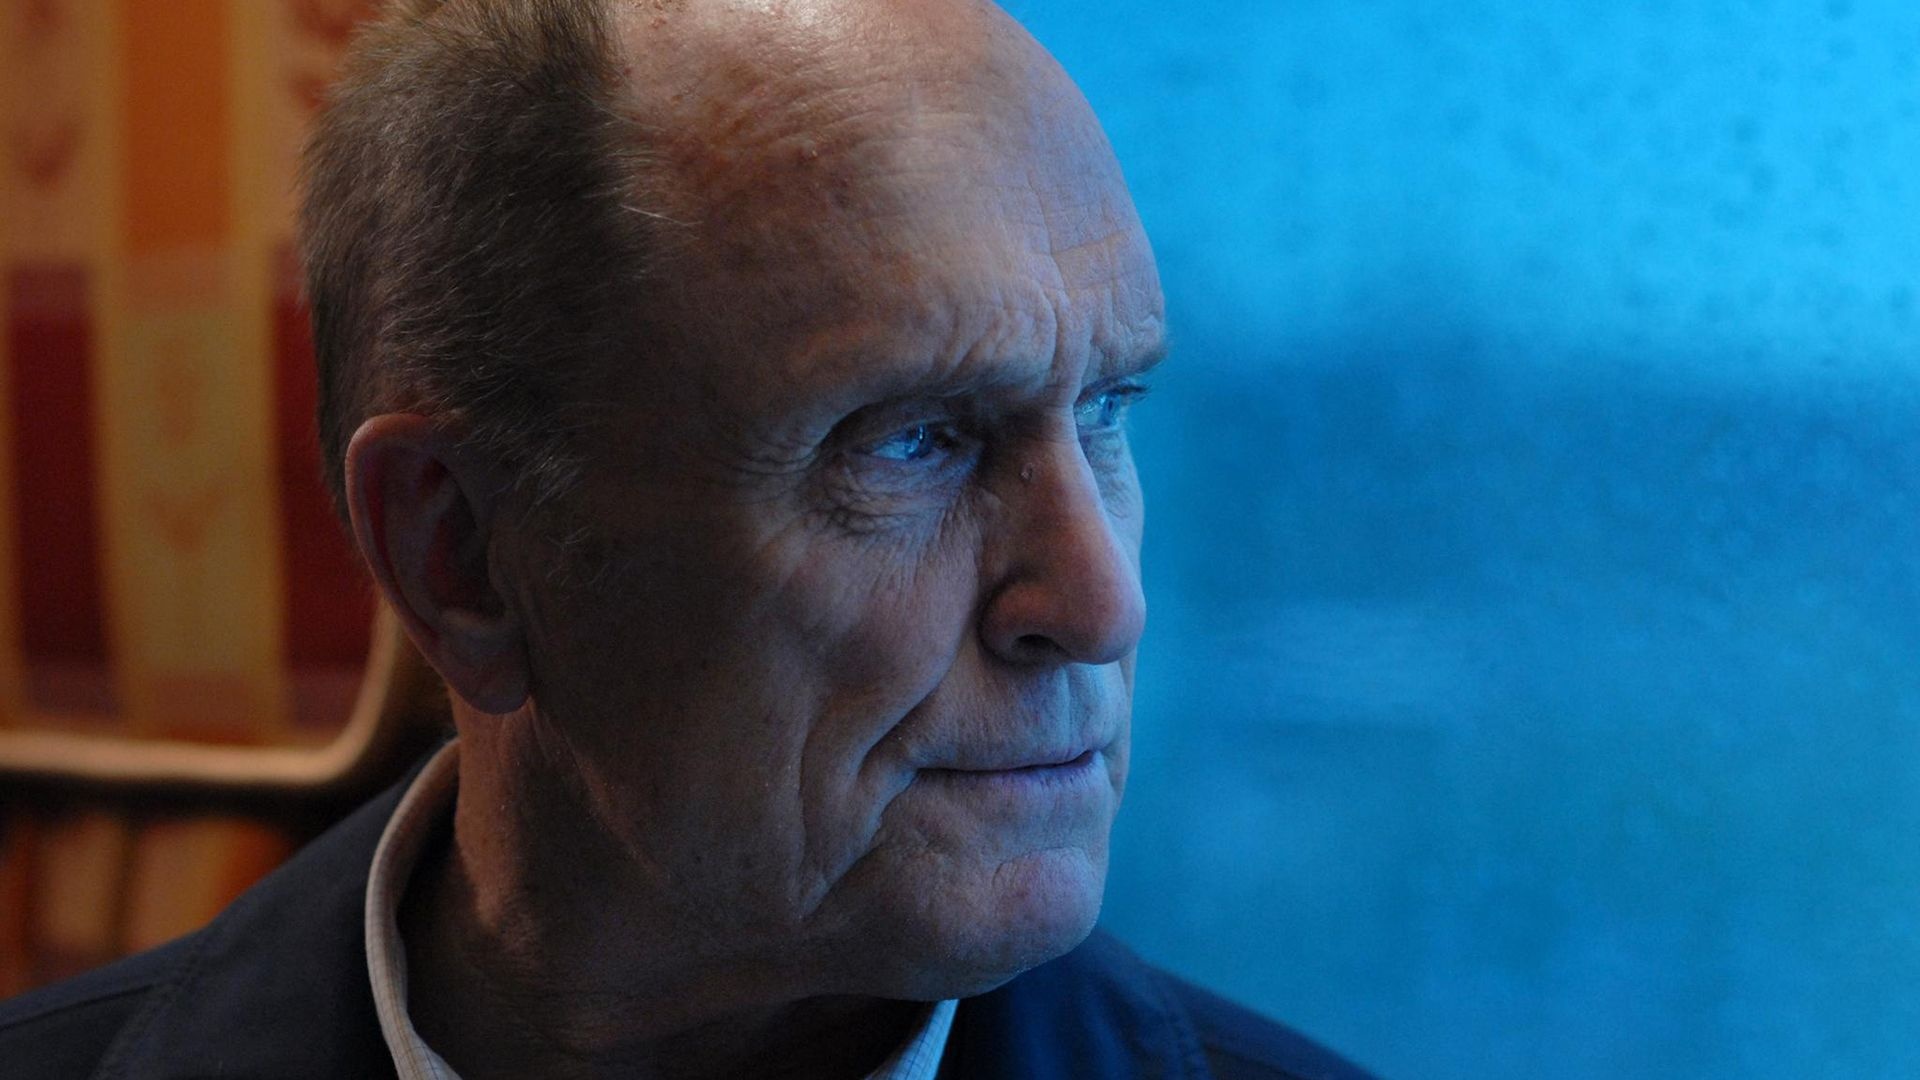 Robert Duvall, Iconic images, High-definition wallpapers, Visual masterpiece, 1920x1080 Full HD Desktop